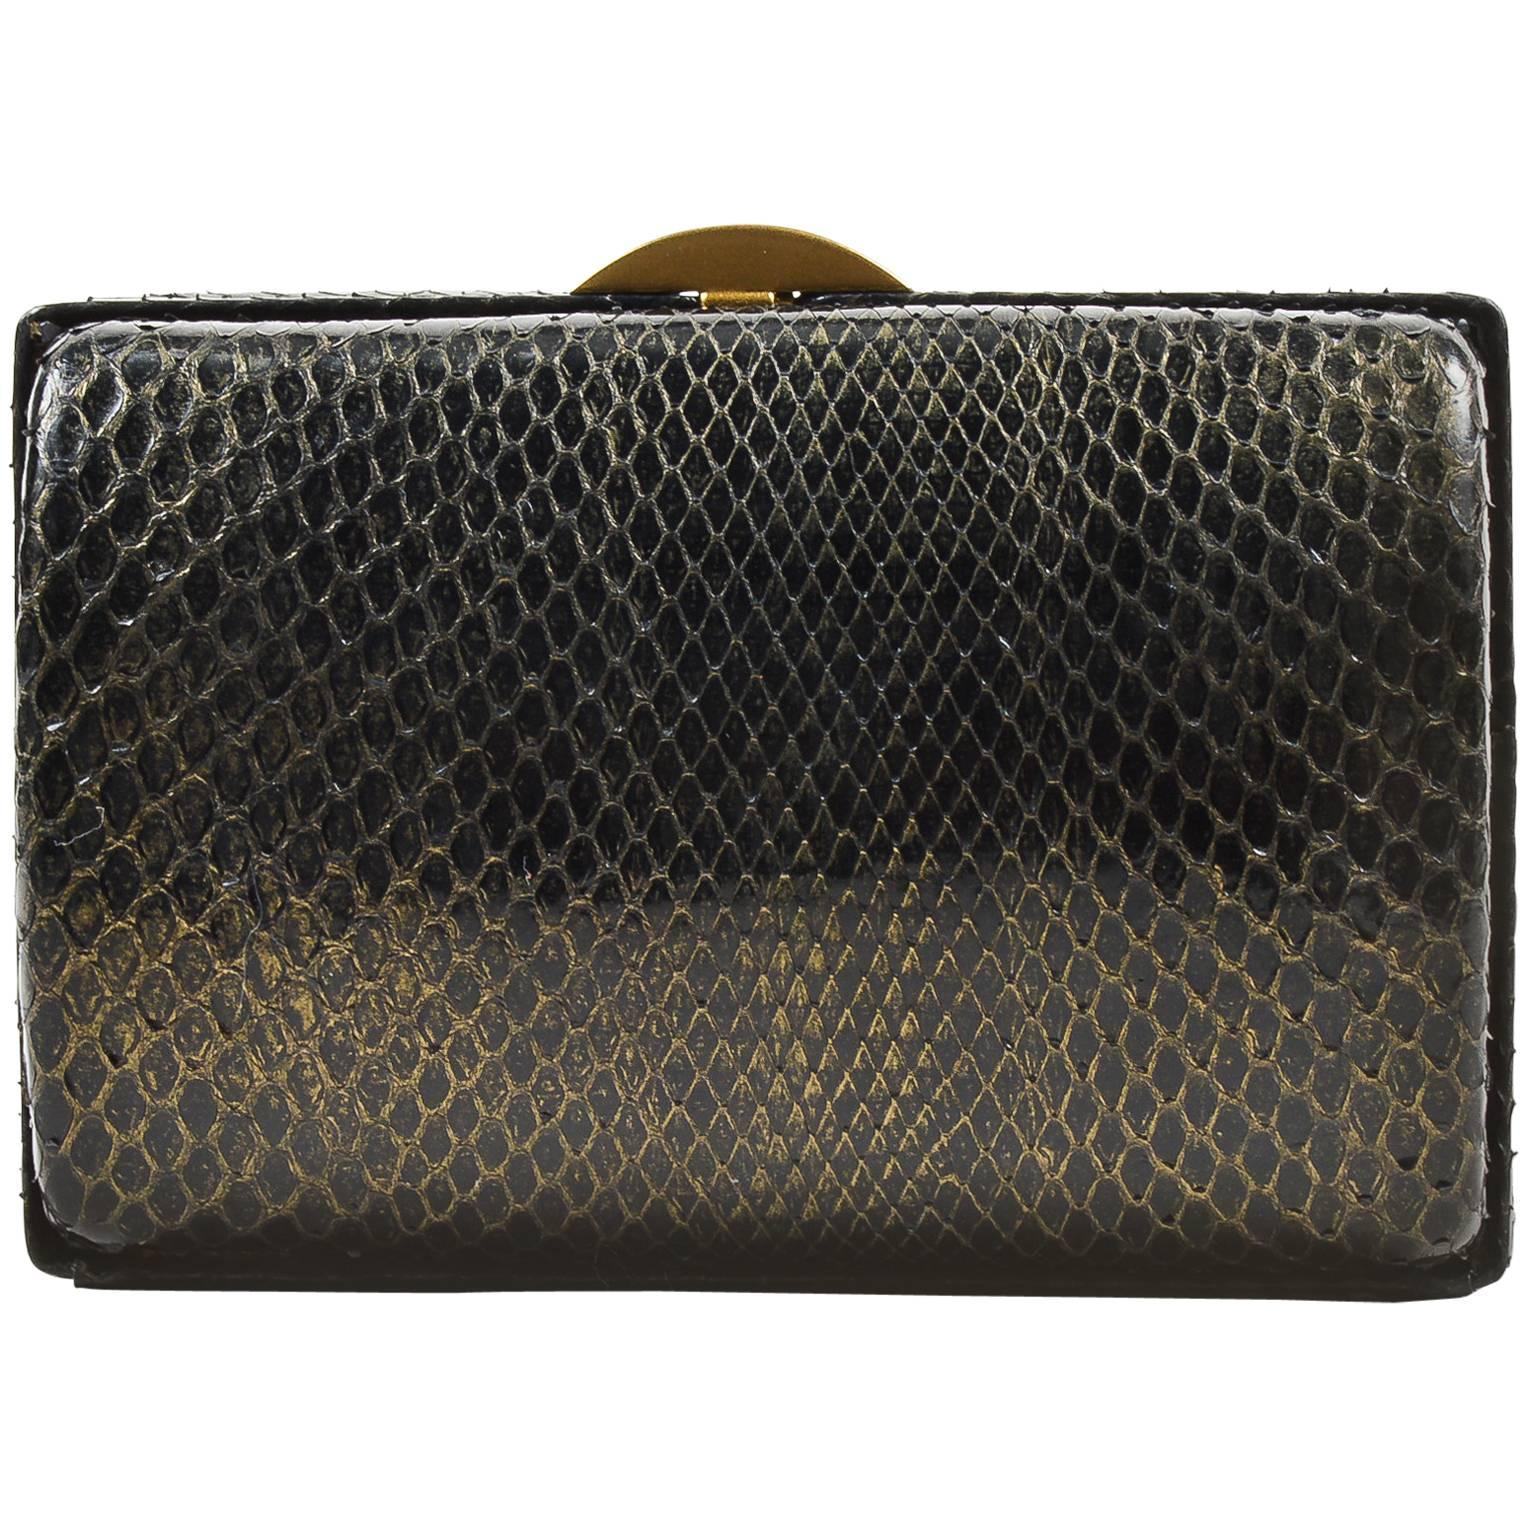 Chanel Black Gold Tone Python Box Frame Small Clutch Bag For Sale